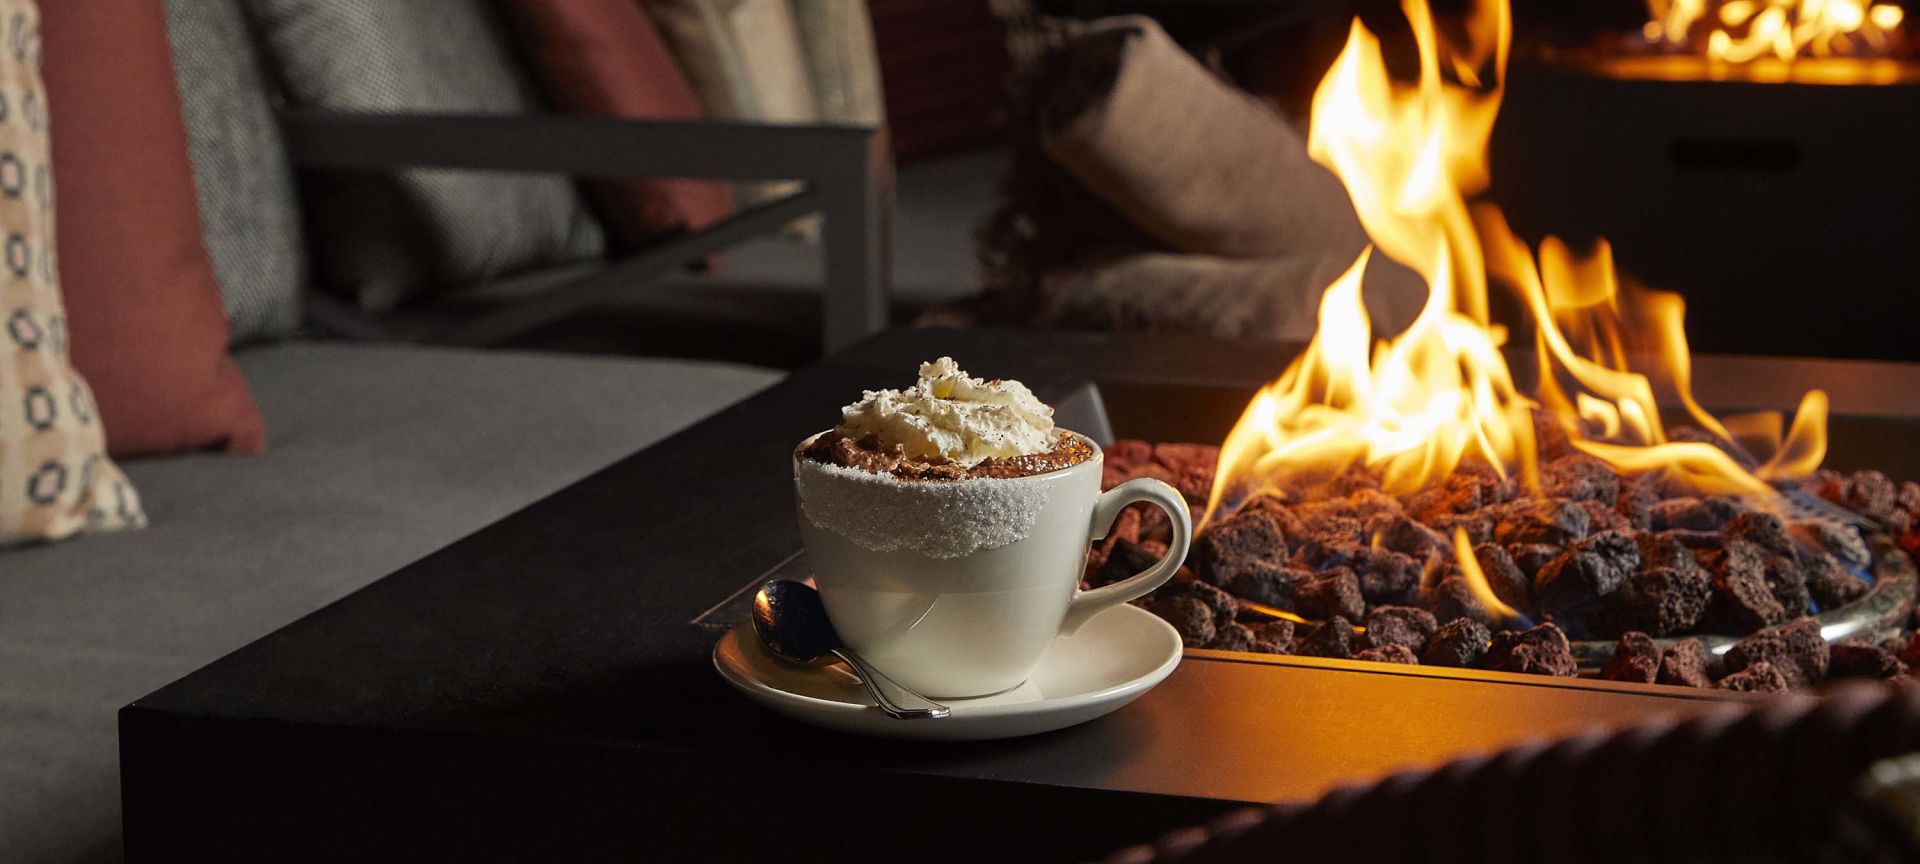 A Cup Of Coffee Sitting Next To A Fireplace